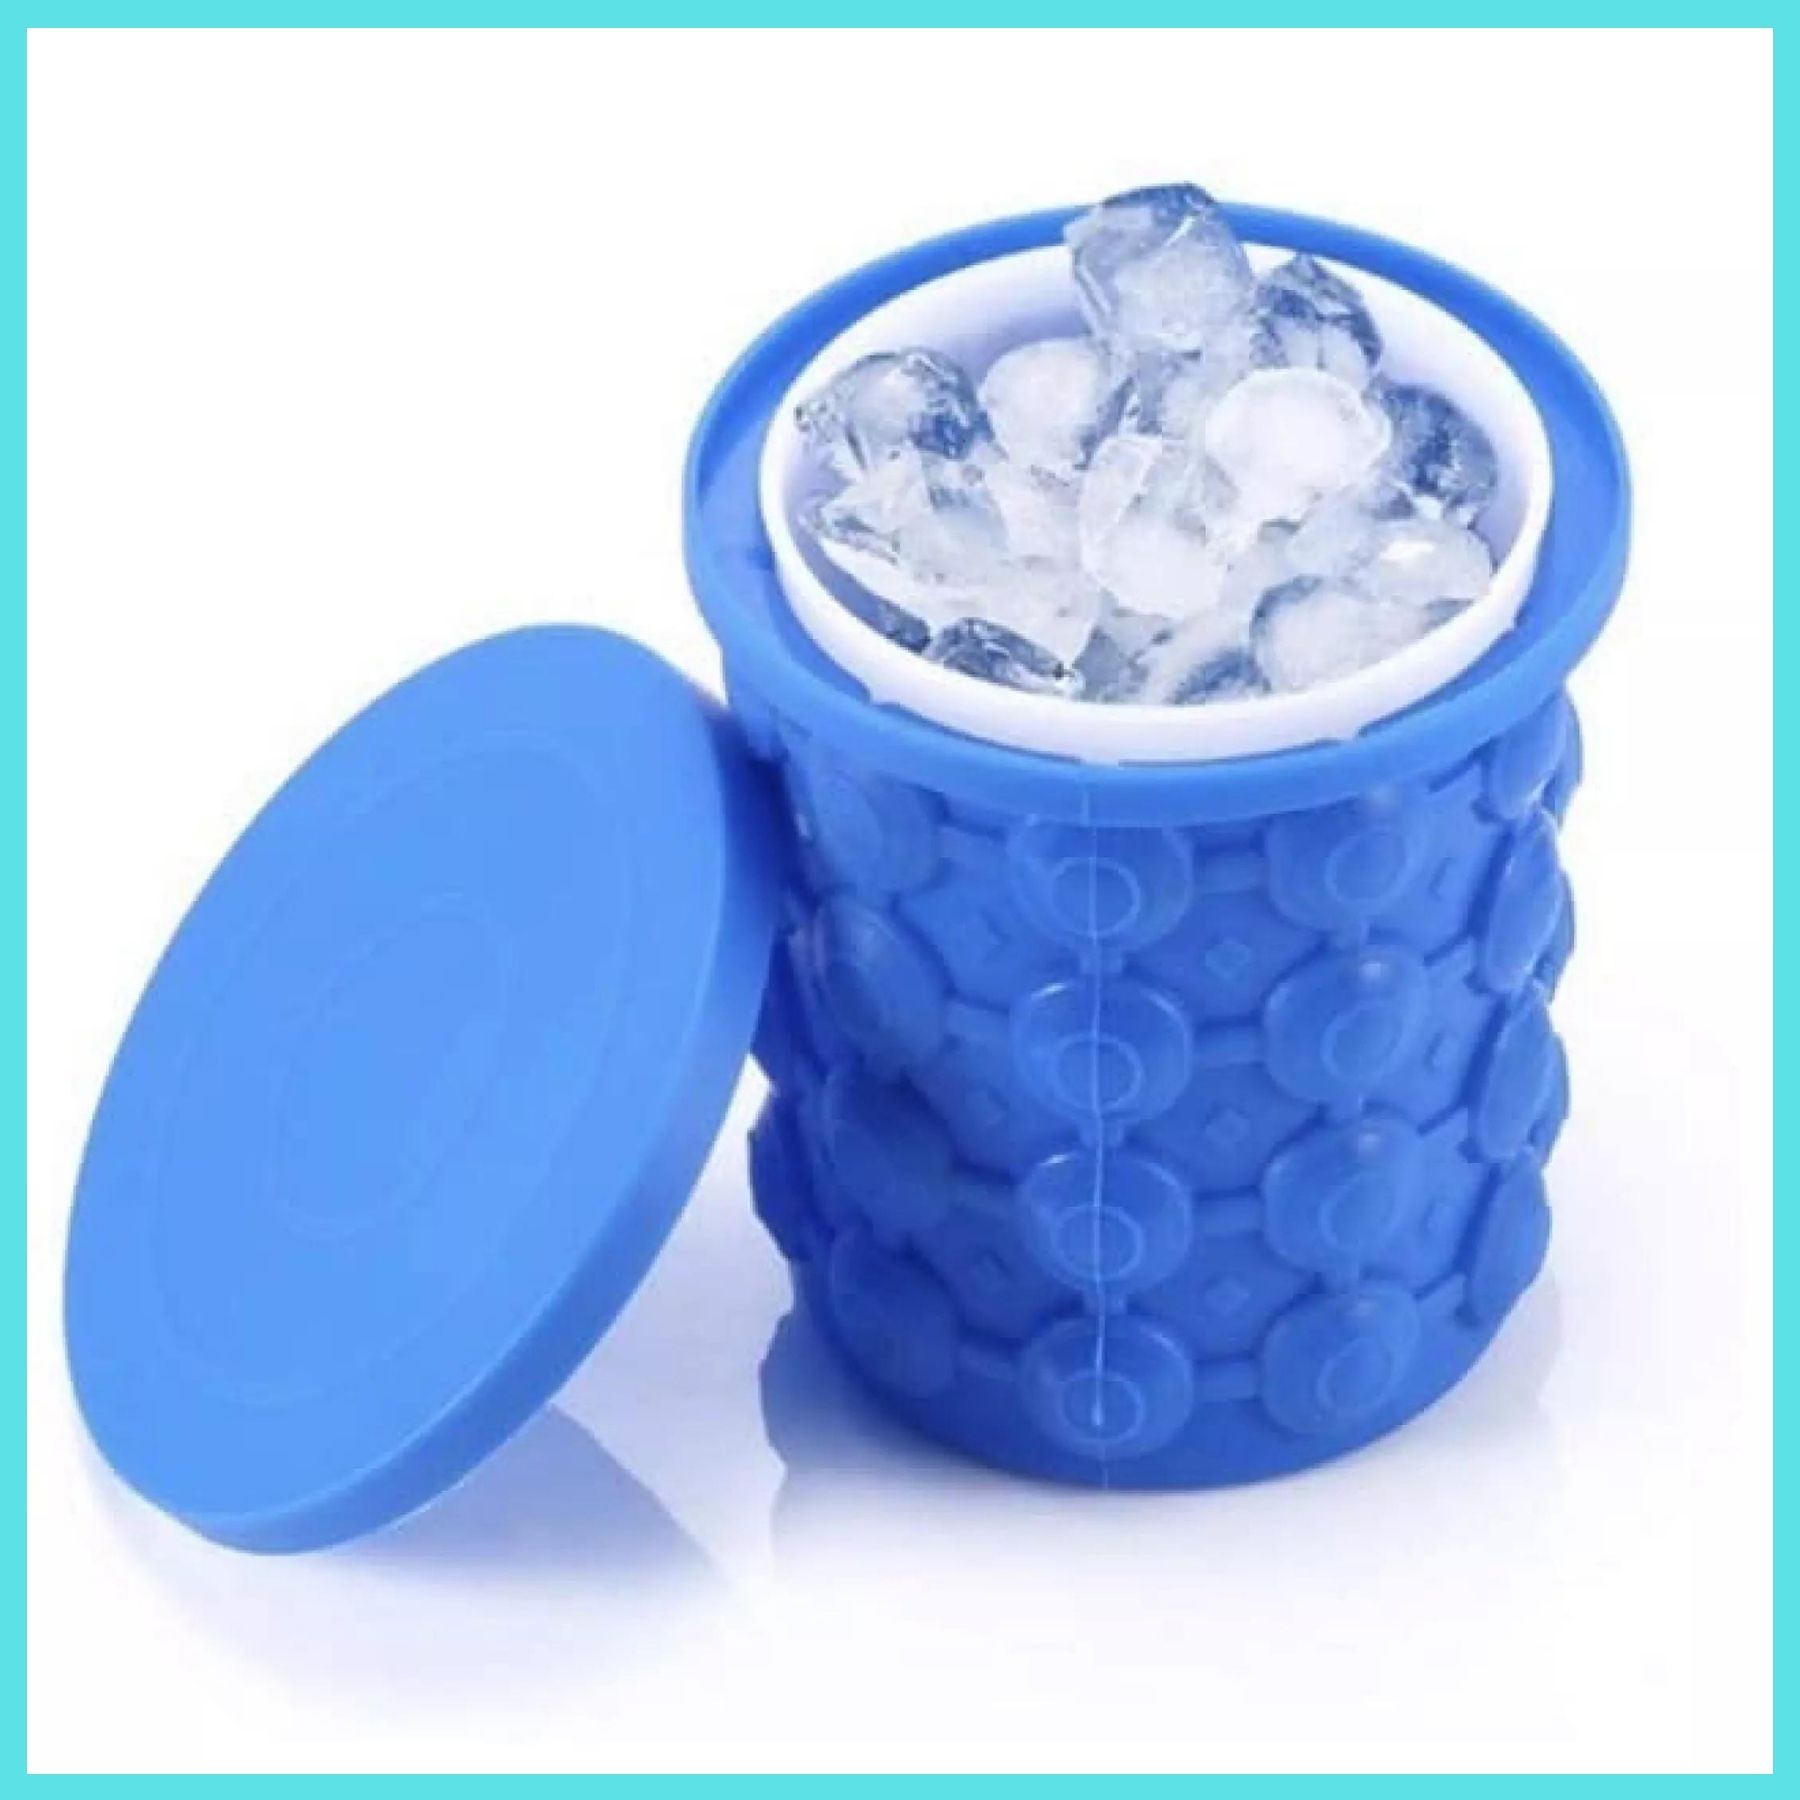  The Ultimate Ice Cube Maker Silicone Bucket with Lid Makes  Small Size Nugget Ice Chips for Soft Drinks, Cocktail Ice, Wine On Ice,  Cylinder Ice Trays, Crushed Ice Cup Maker Mold